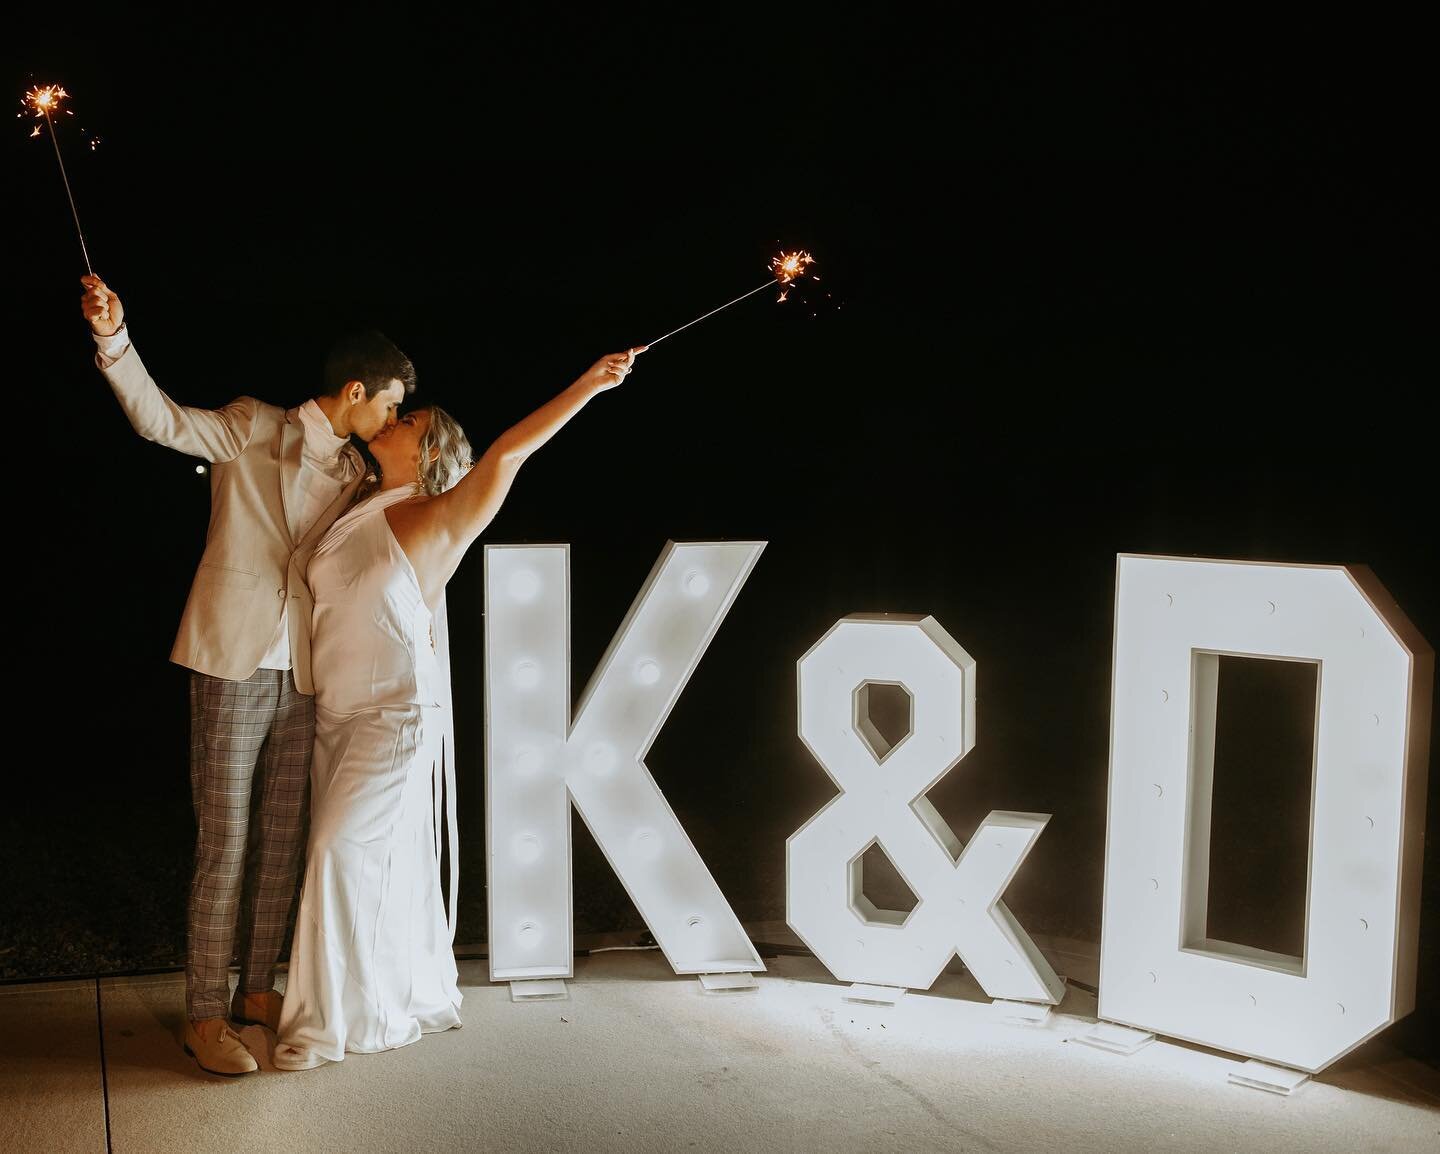 🌟 A BIG thank you to the lovely Katie for choosing us to be a part of her dream wedding day! ✨ We were so happy to provide our 4ft tall marquee lights to add that extra touch to her special day. Katie's trust in our services means the world to us, a